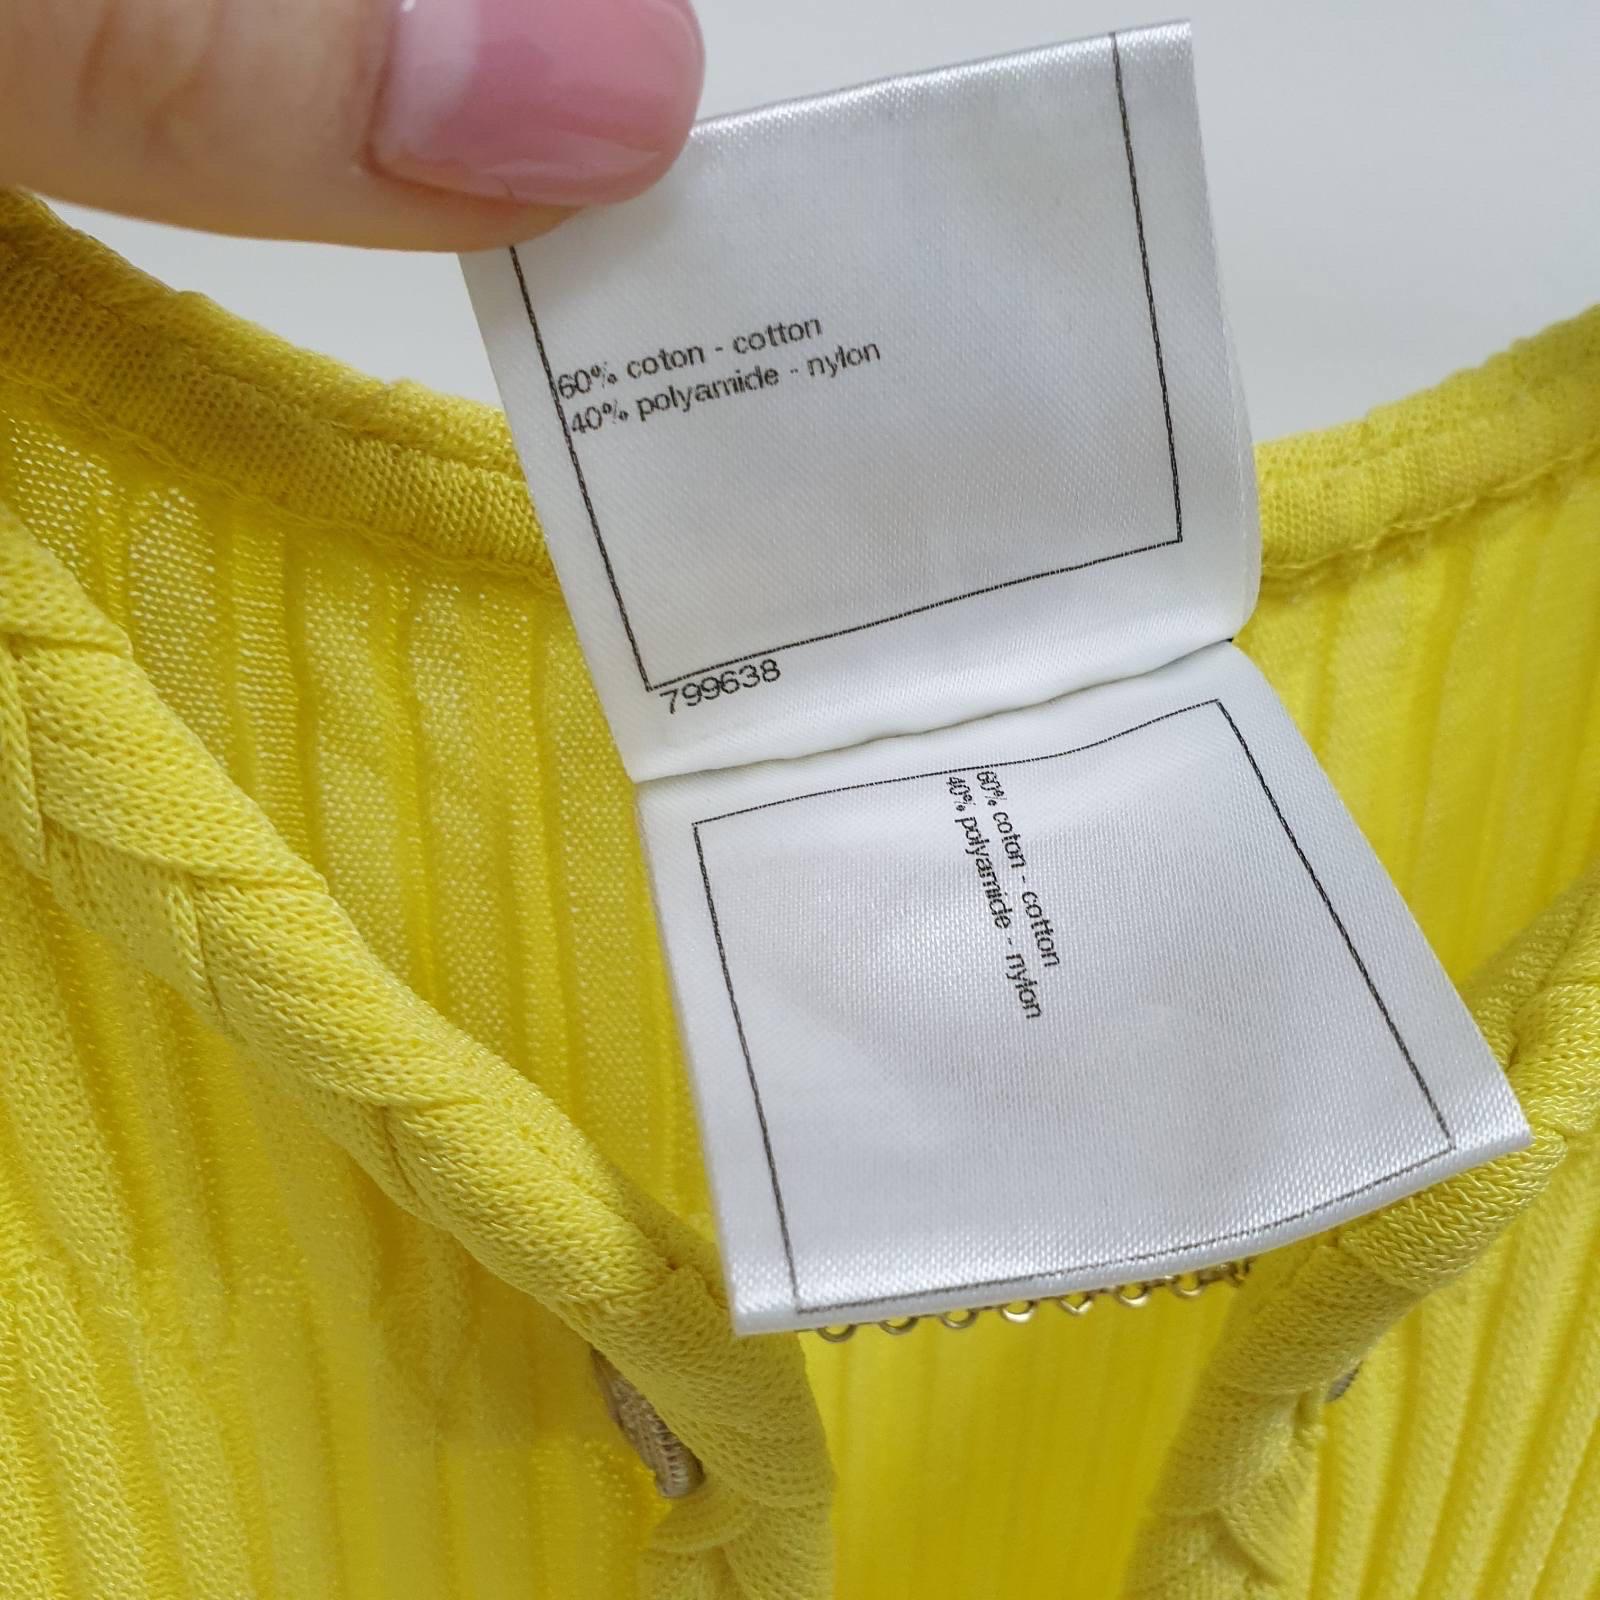 CHANEL Yellow Textured Cotton Jacquard Knit Sleeveless Dress In Excellent Condition For Sale In Krakow, PL